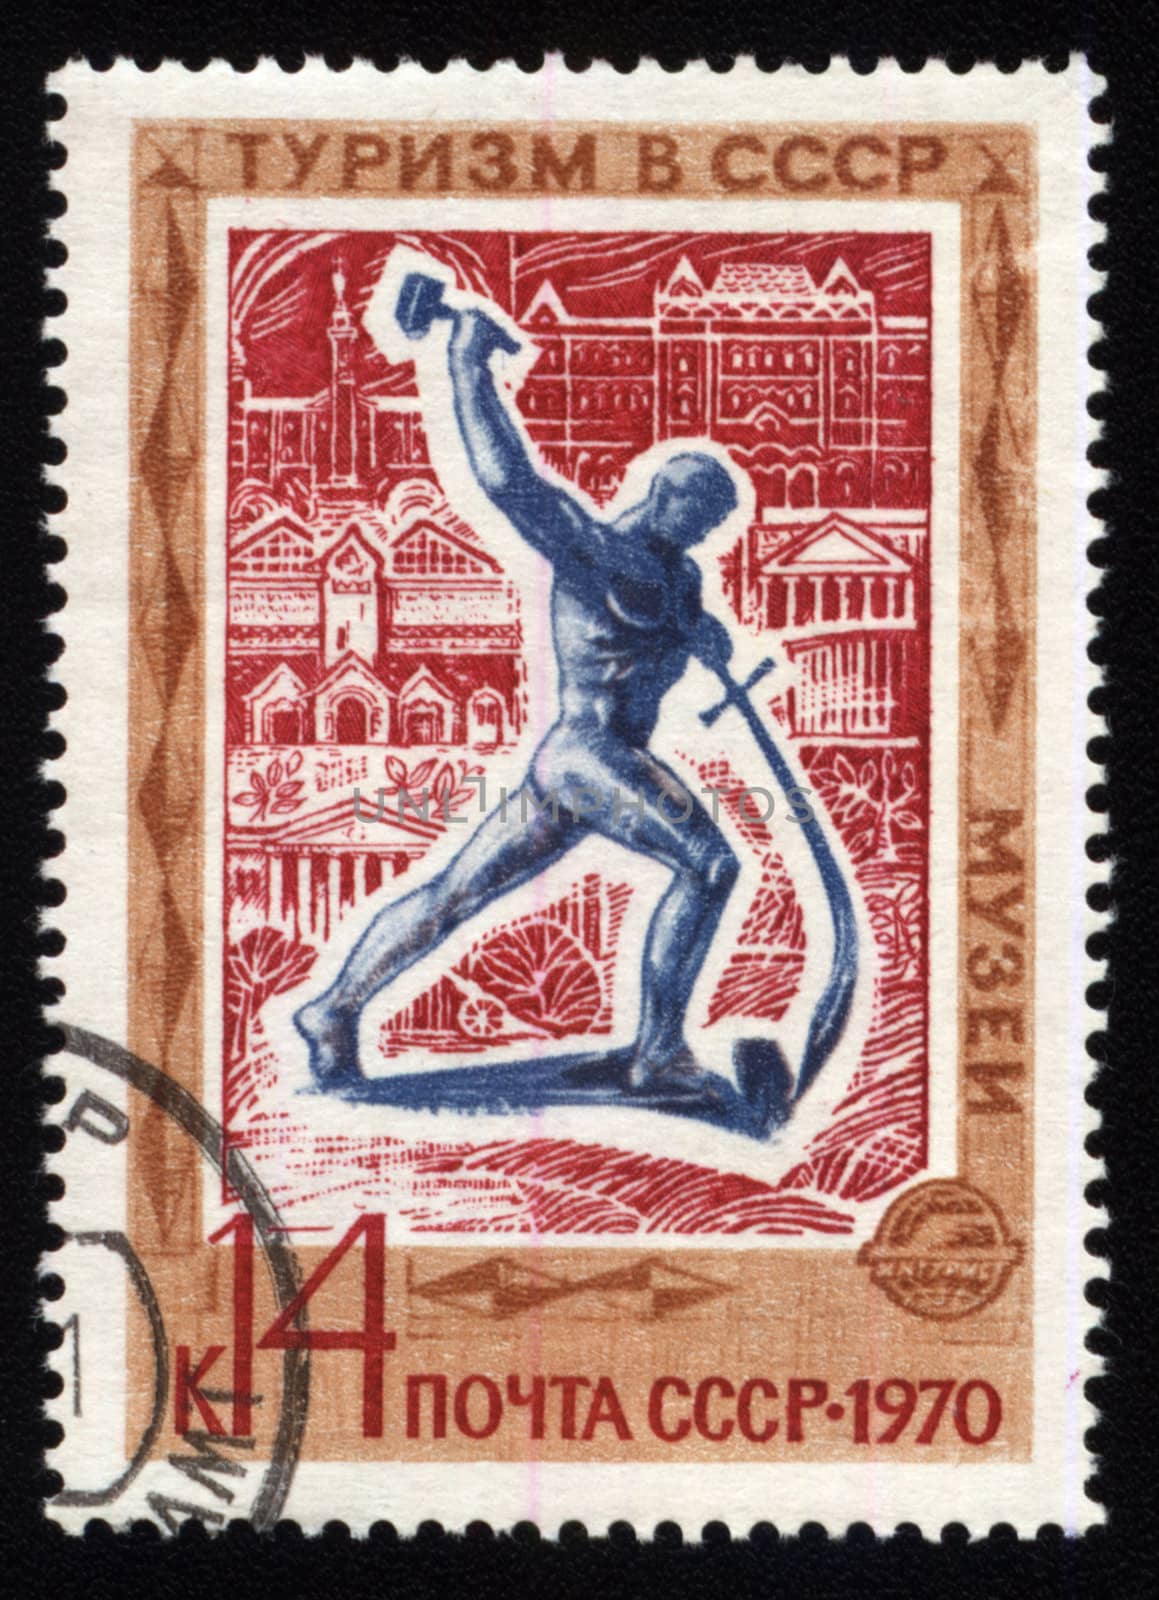 USSR - CIRCA 1970: stamp printed in USSR, shows blacksmith with sword, circa 1970